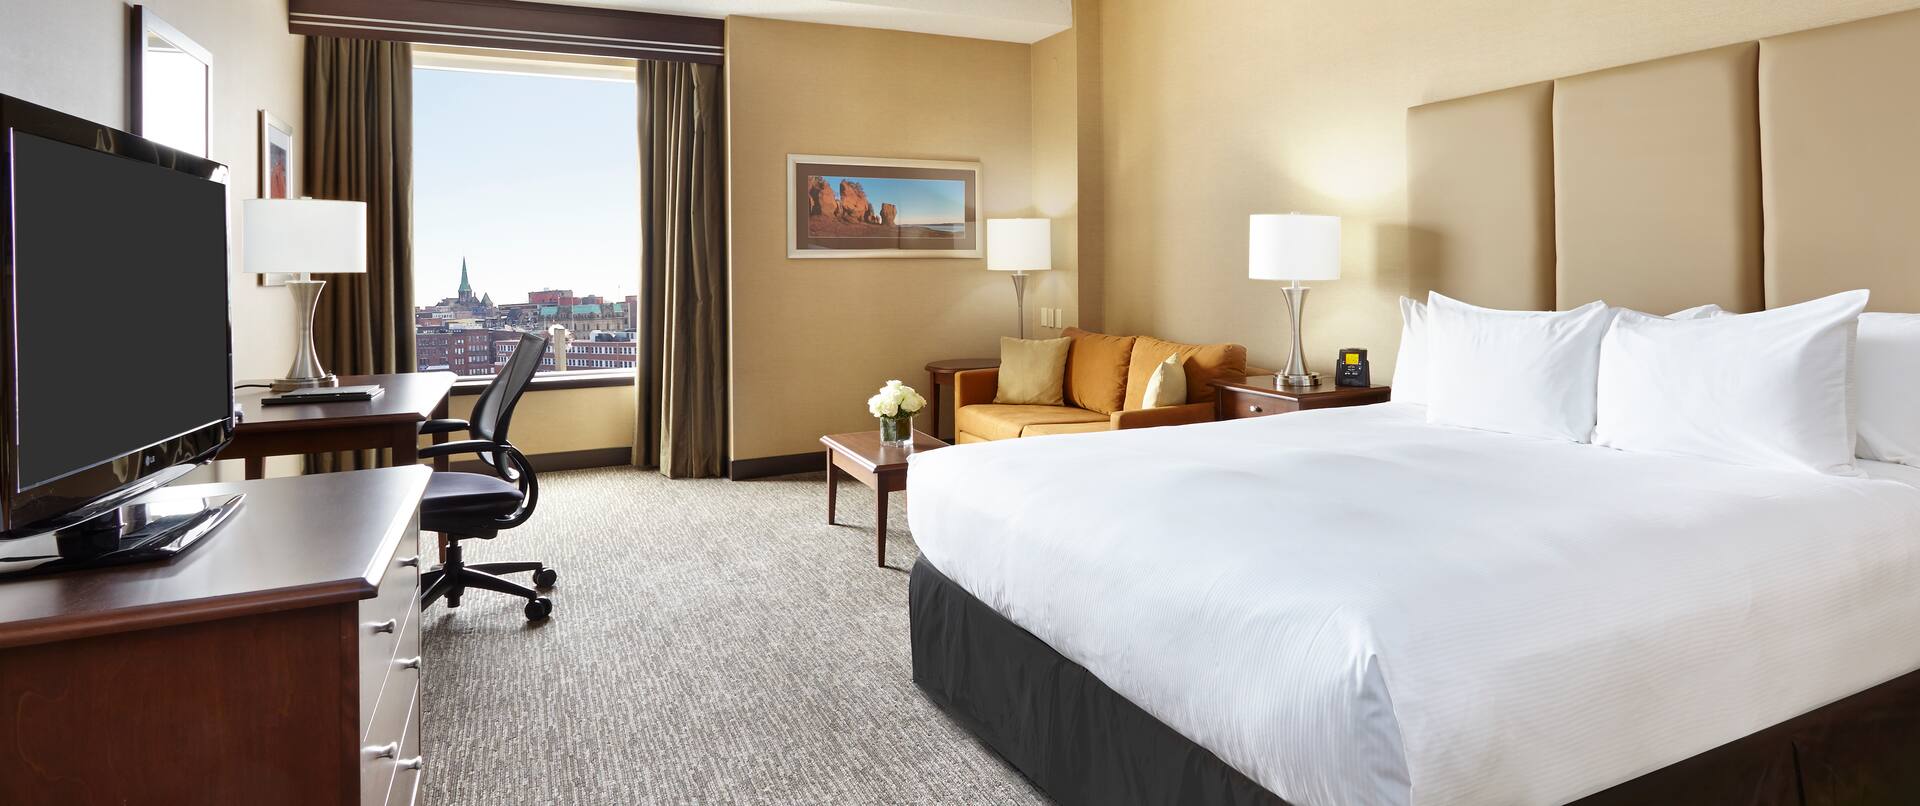 One king bed with city views of Saint John. 